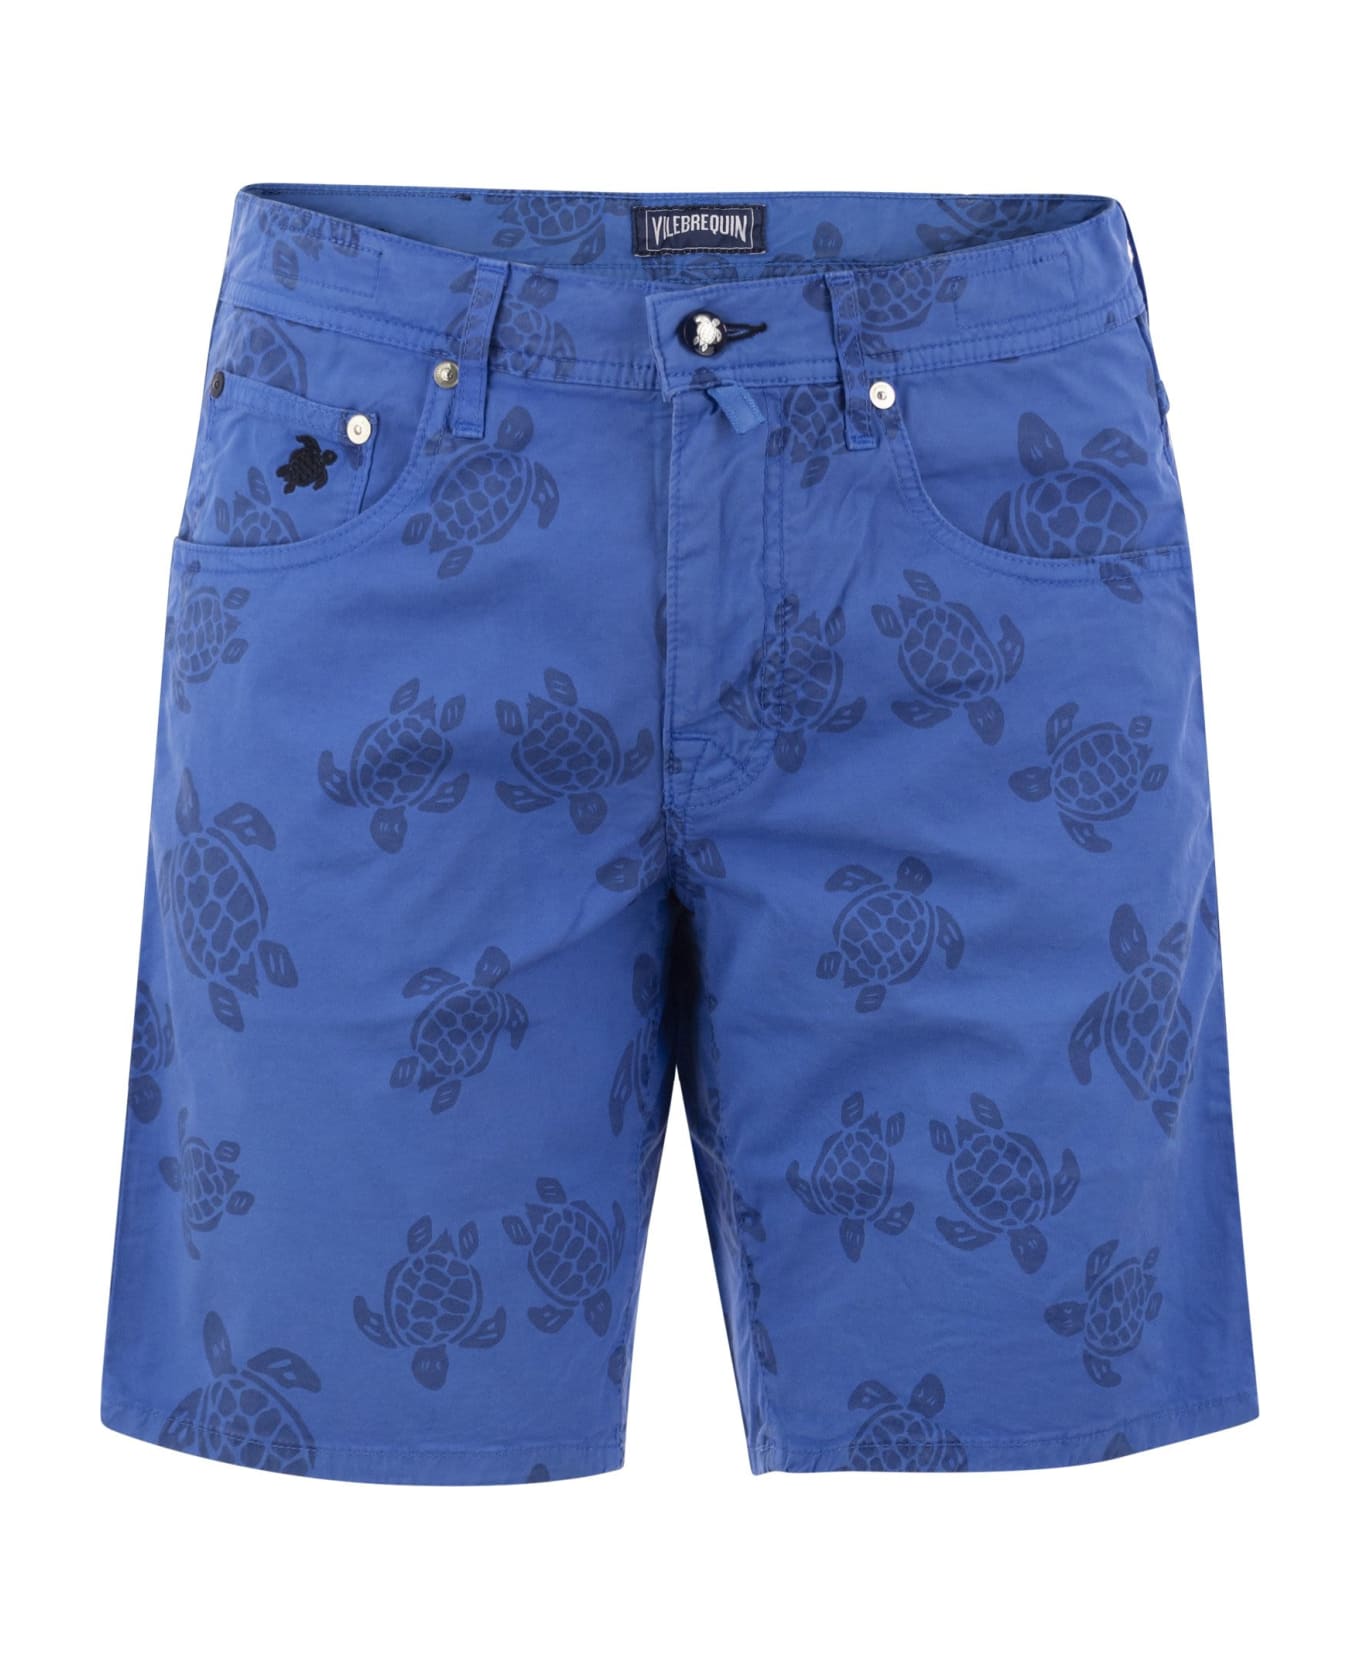 Vilebrequin Bermuda Shorts With Ronde Des Tortues Resin Print - Blue Marine ショートパンツ